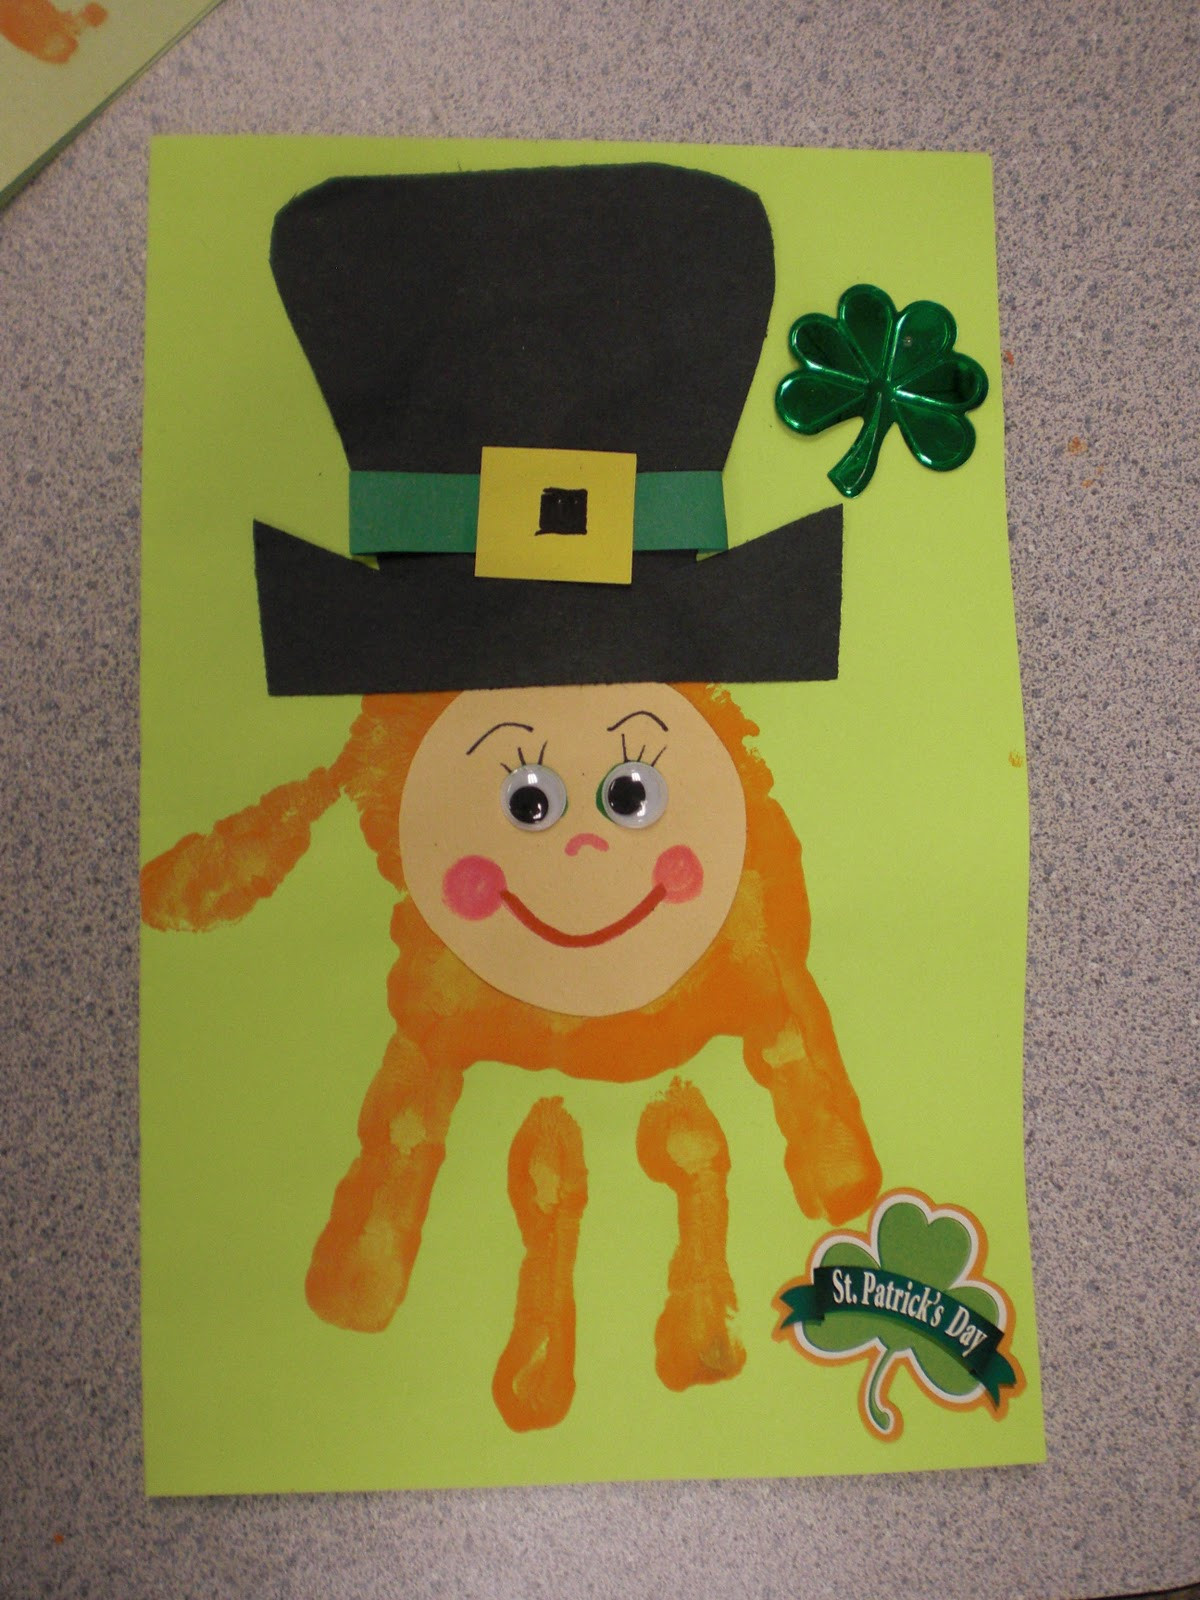 St Patrick Day Art And Crafts For Preschoolers
 PATTIES CLASSROOM St Patrick s Day Writing Ideas